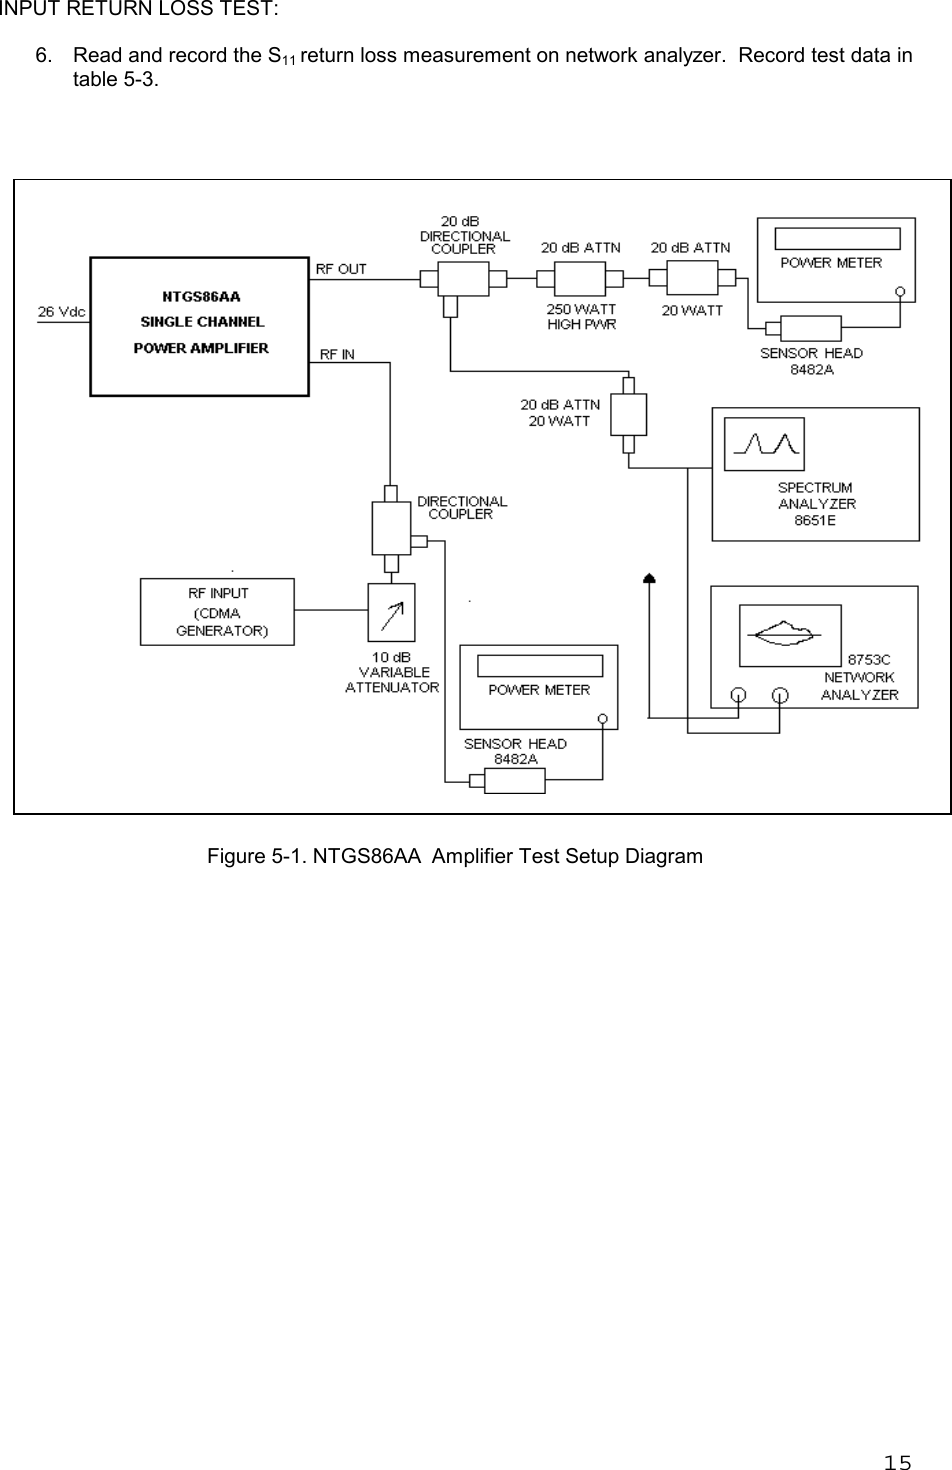 15INPUT RETURN LOSS TEST:6. Read and record the S11 return loss measurement on network analyzer.  Record test data intable 5-3.Figure 5-1. NTGS86AA  Amplifier Test Setup Diagram